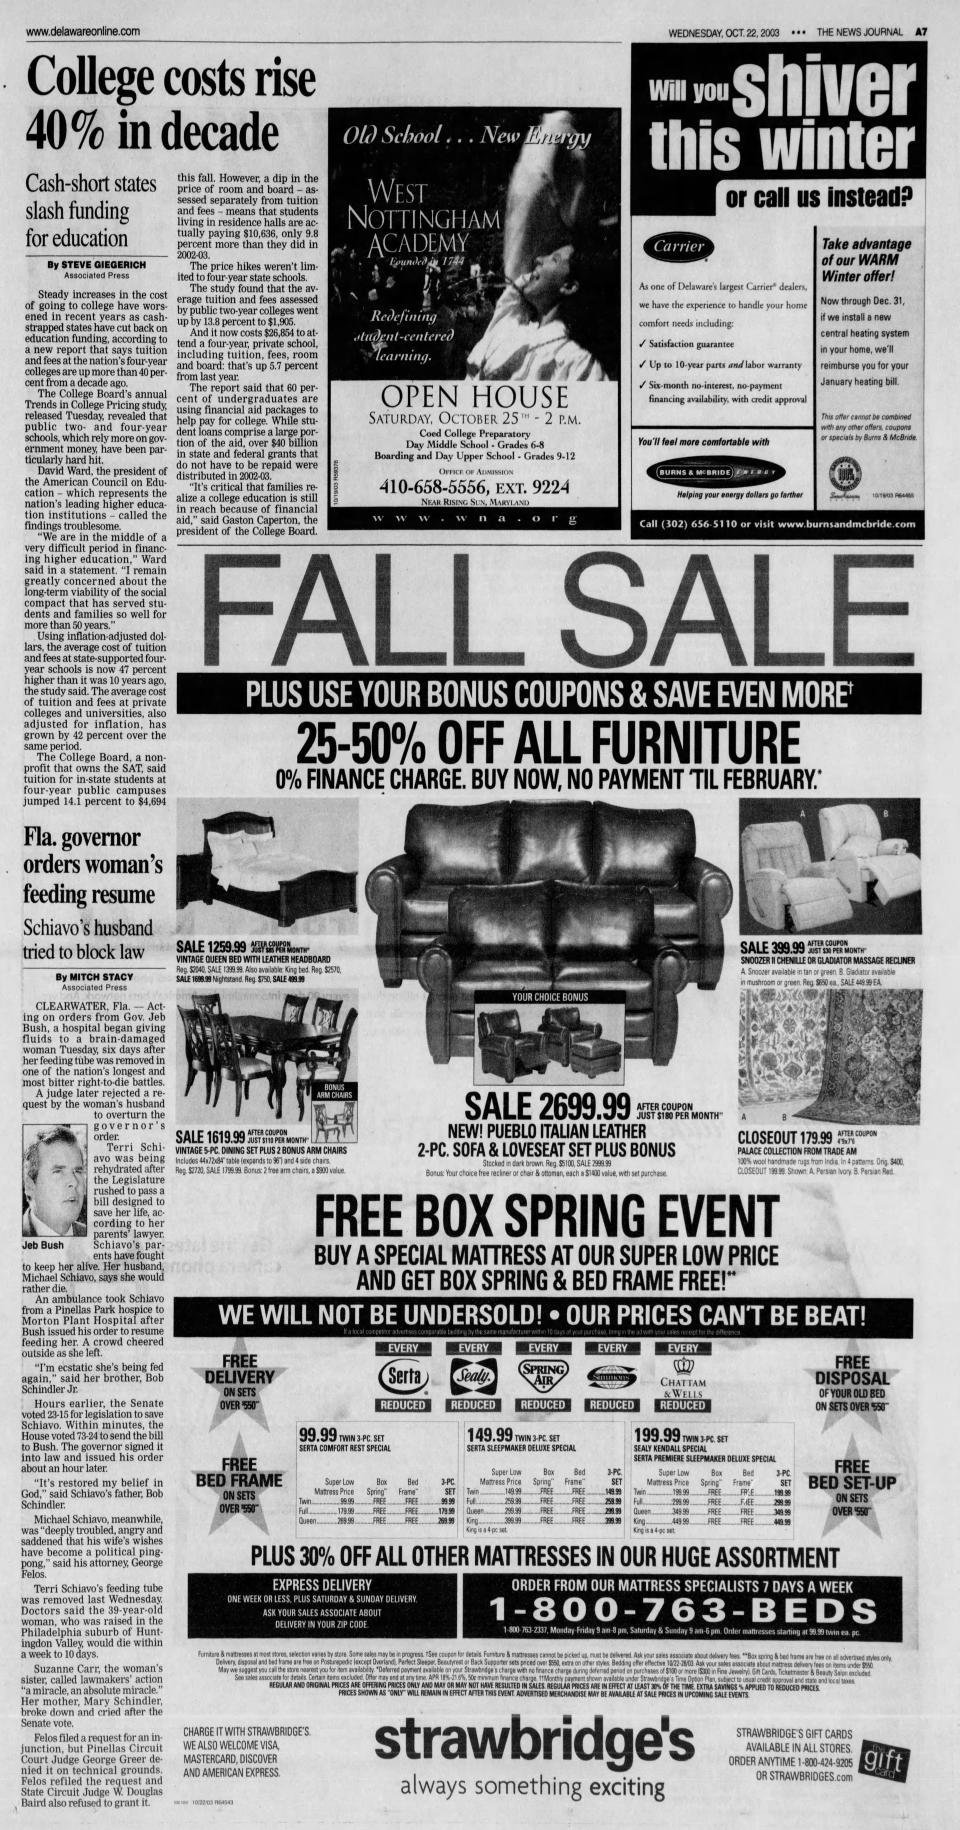 Page A7 of The News Journal from Oct. 22, 2003.